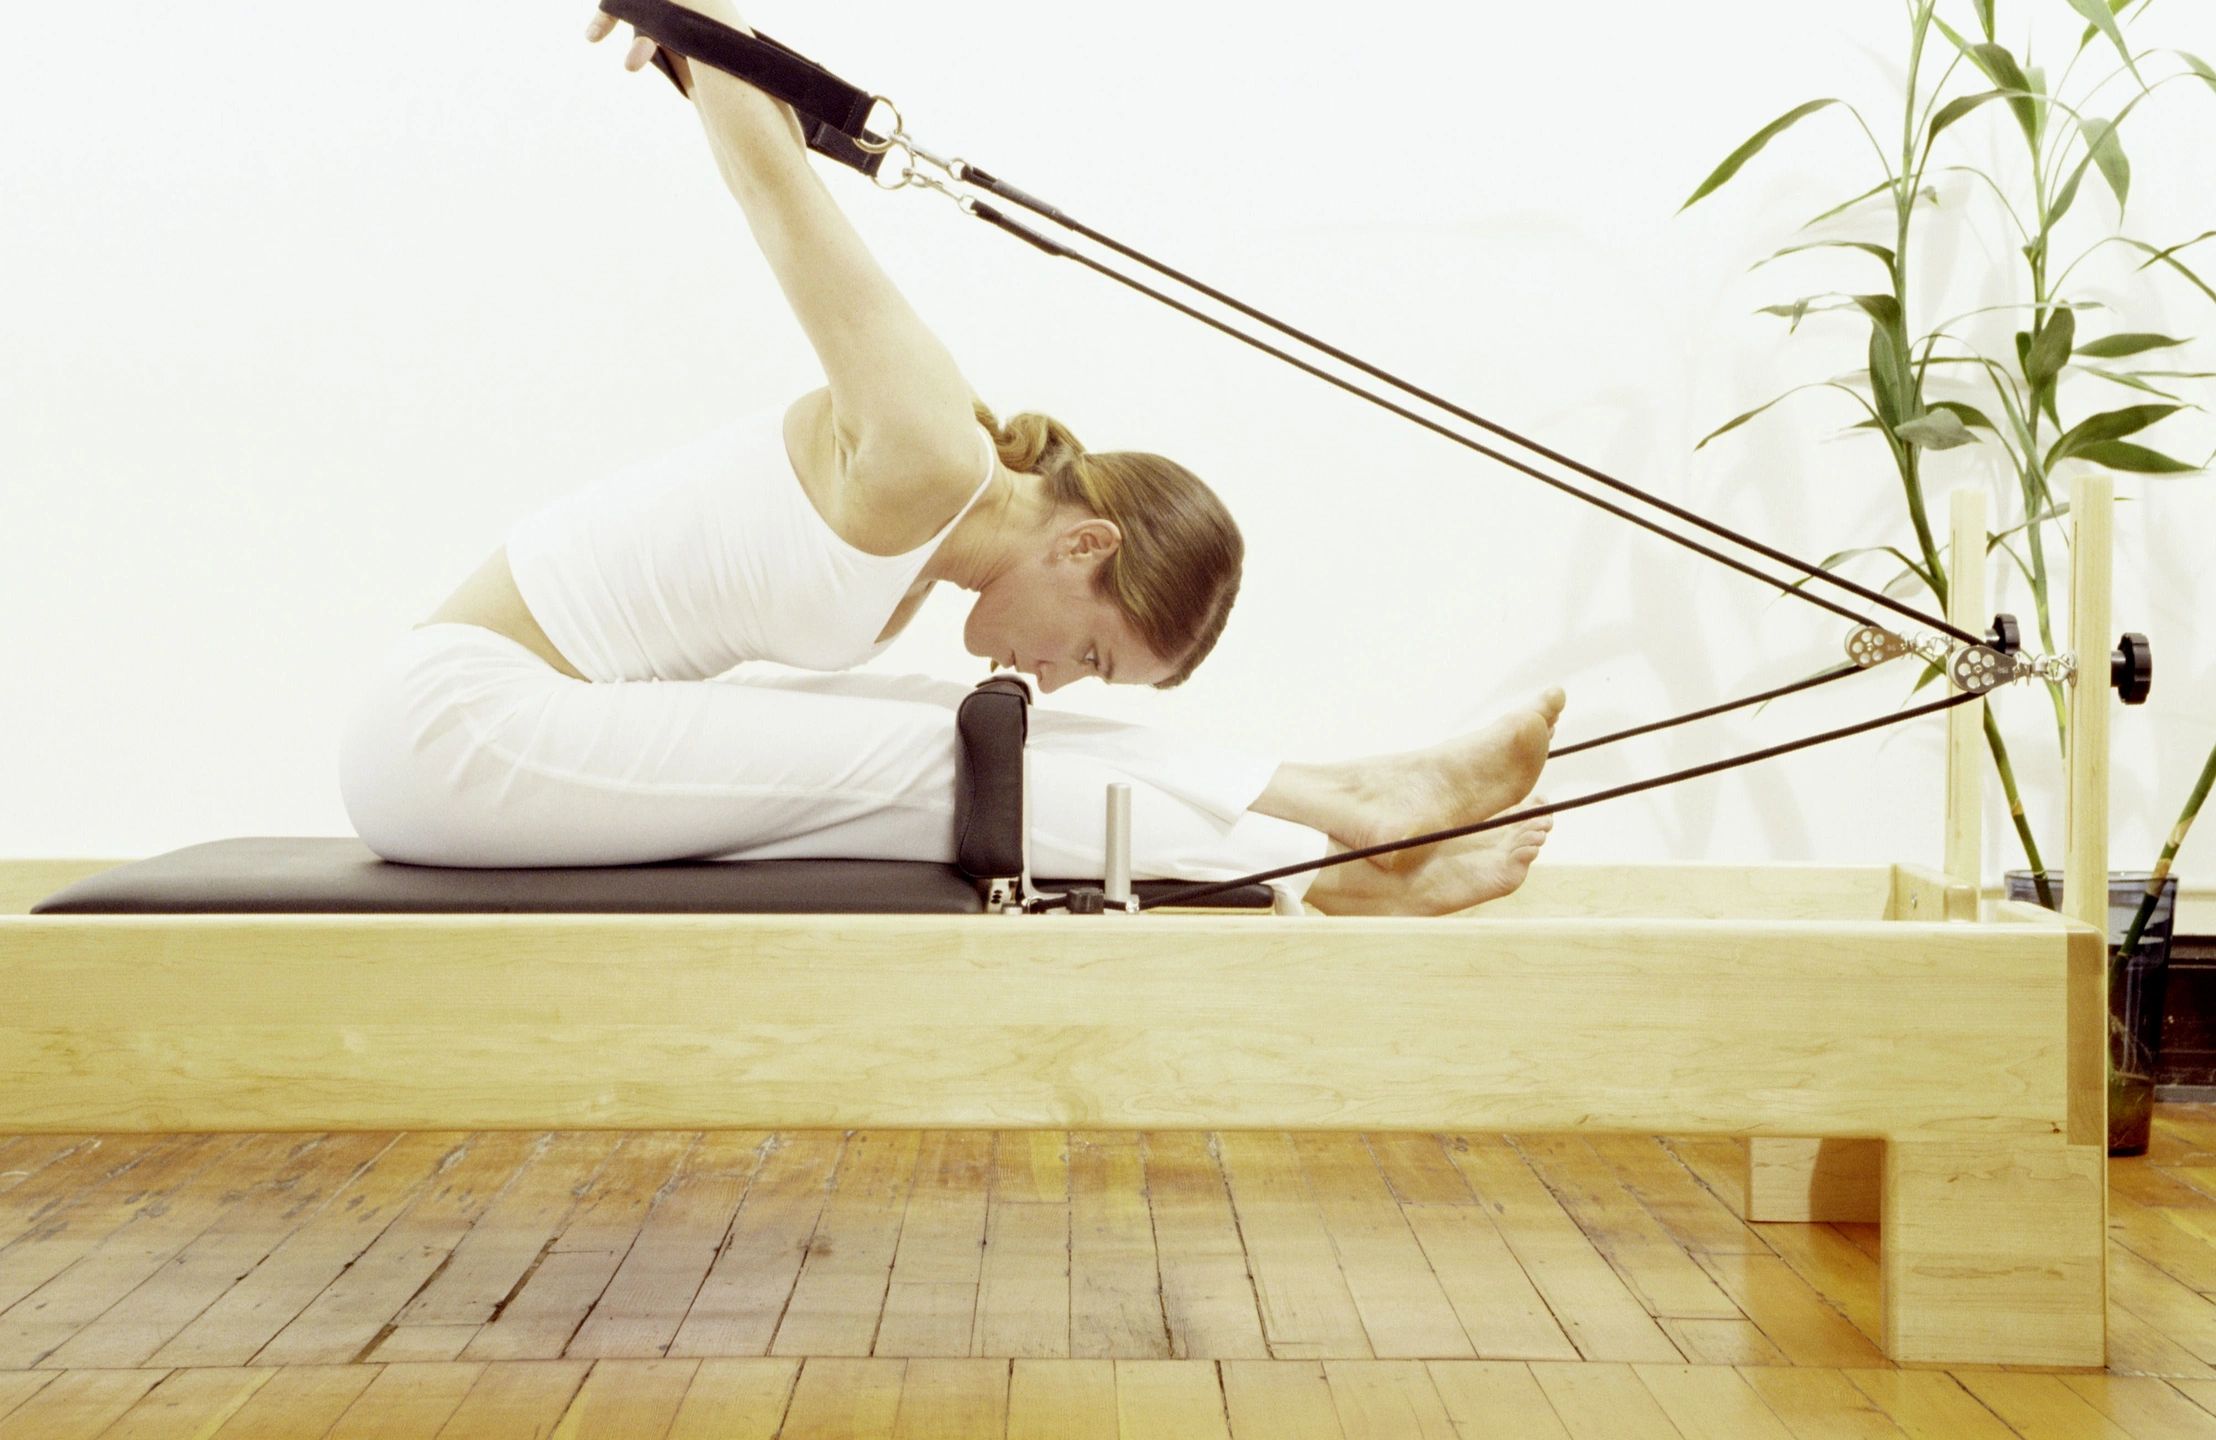 Essential Pilates Gear for Home Workouts - Awake & Mindful